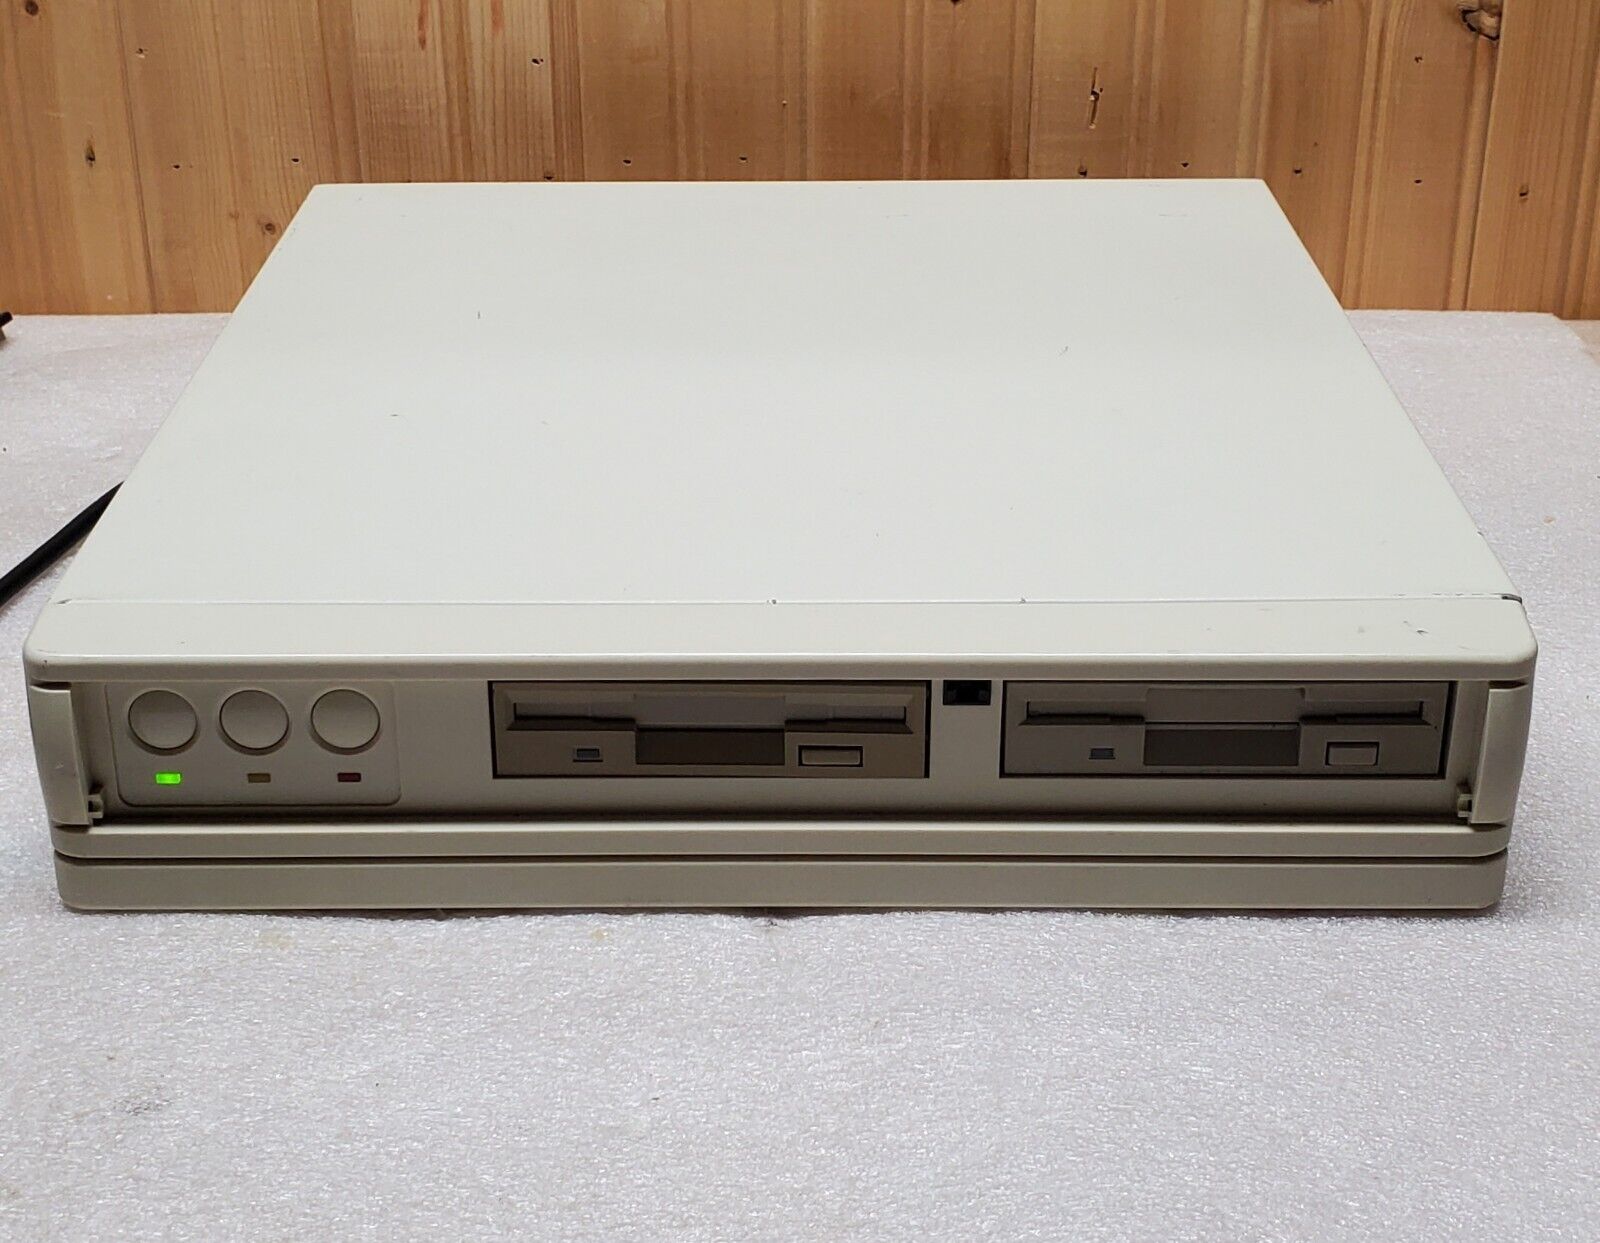 Vintage Retro PC Computer AMD 386SX Powers On, Untested (Unknown Brand)